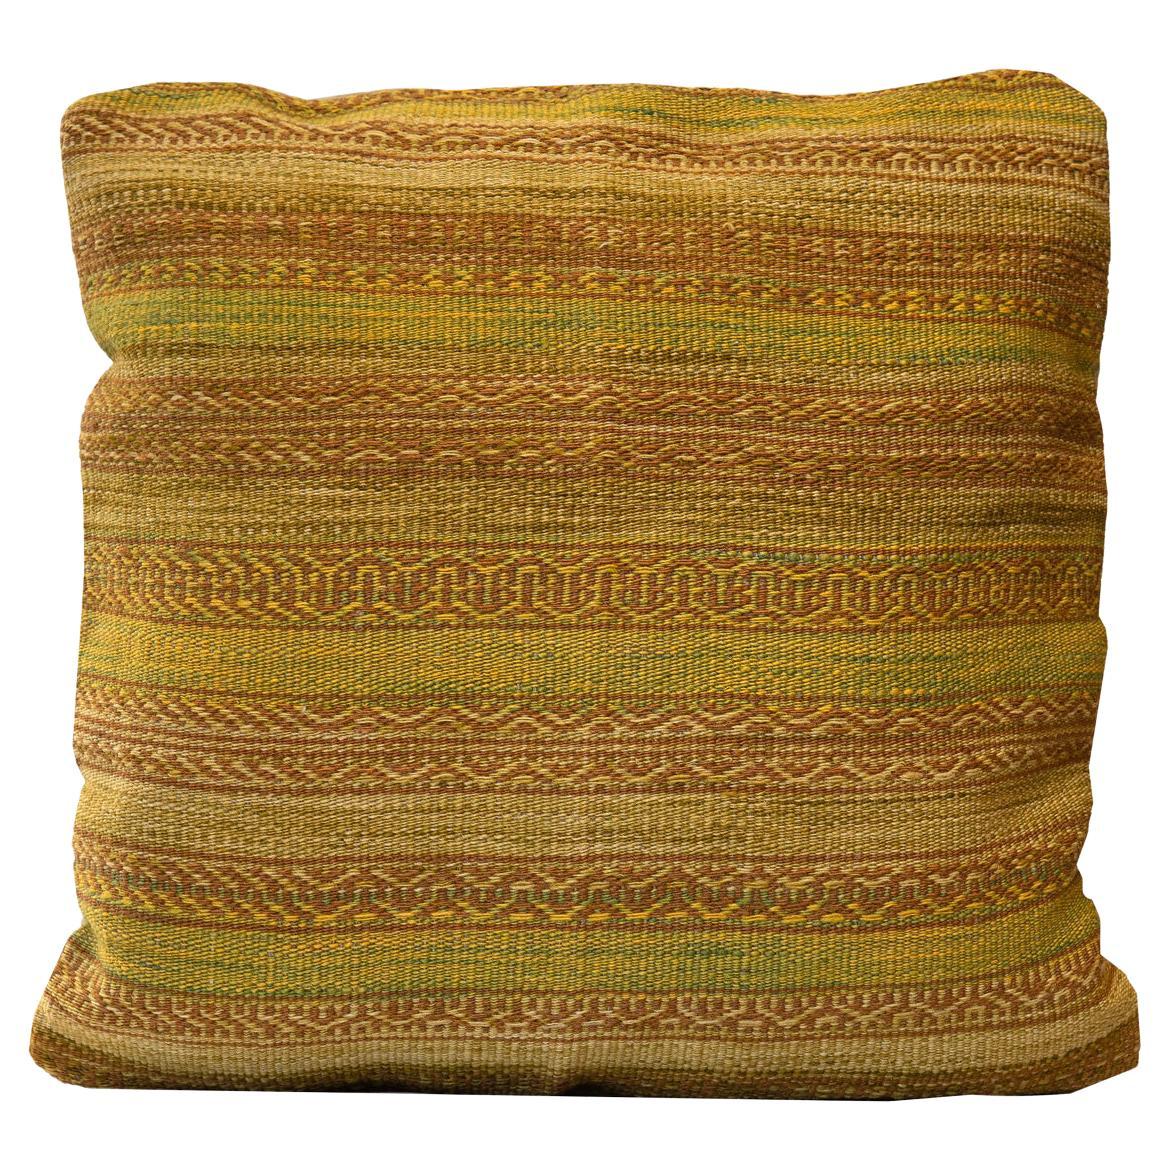 Mustard Gold Kilim Cushion Cover Geometric Striped Oriental Scatter Pillow